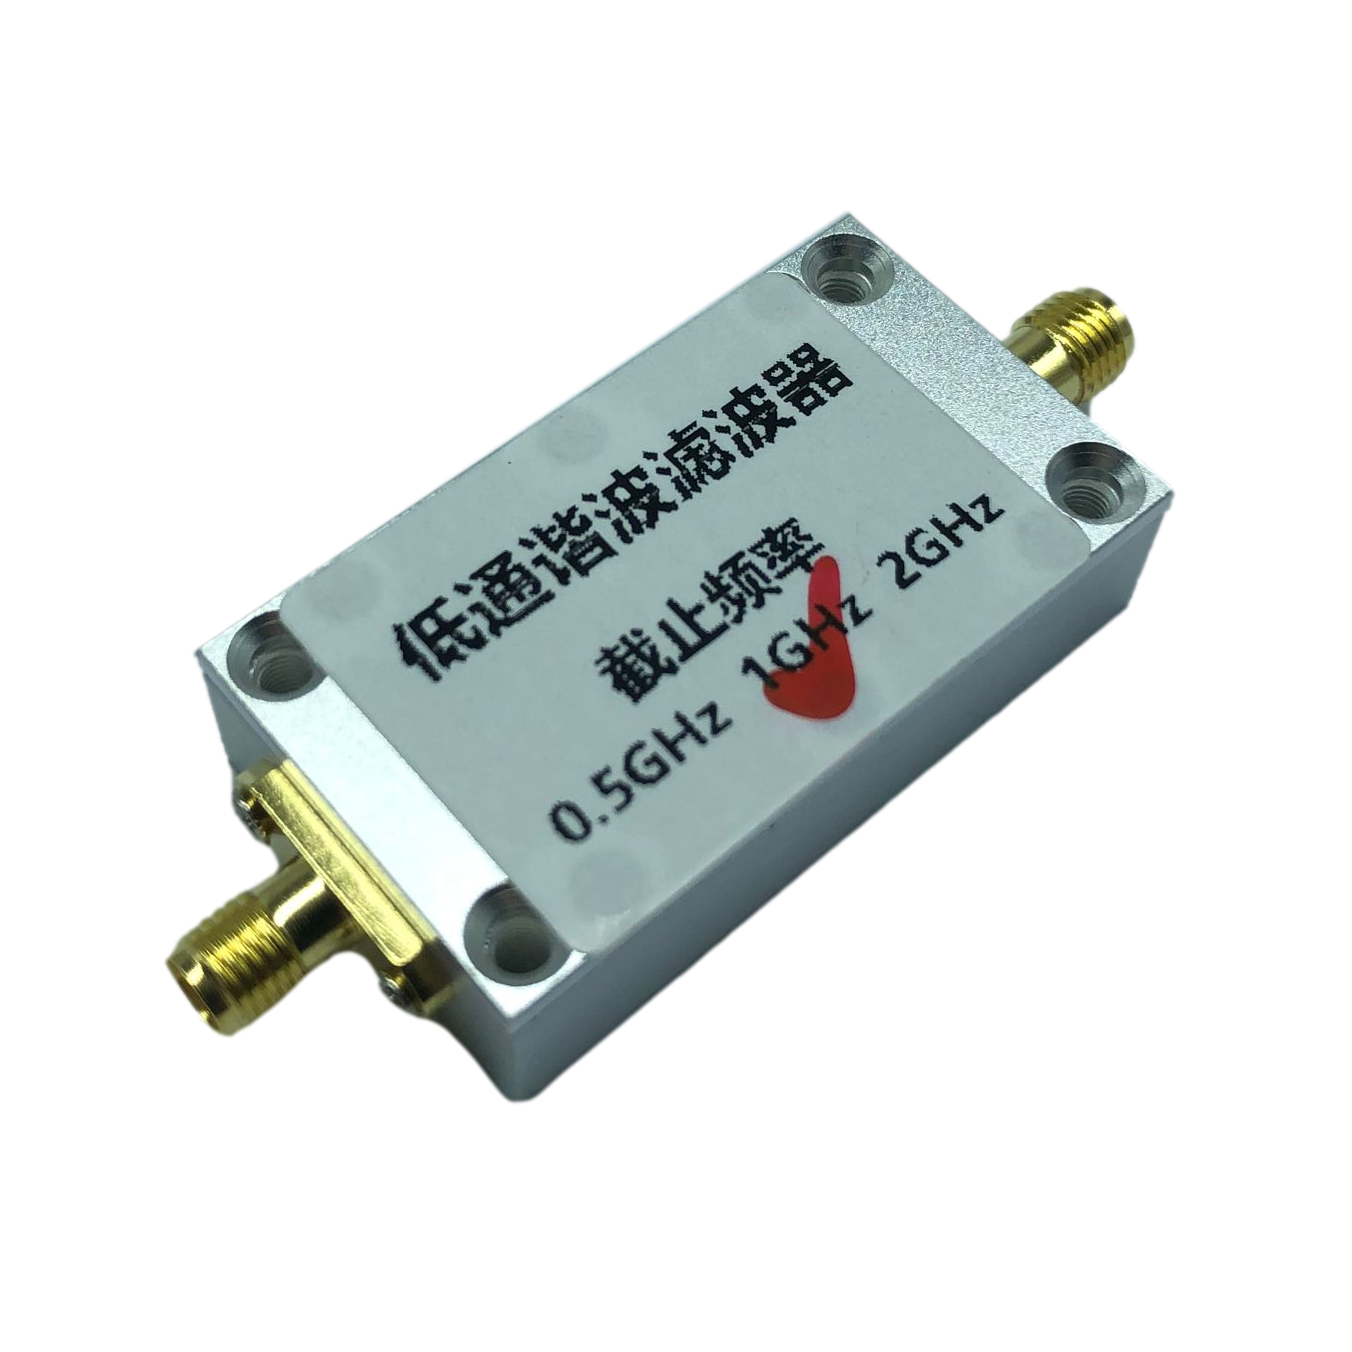 ADF4351-500MHz1GHz2GHz-Phase-locked-Loop-Low-pass-Harmonic-Filter-for-433MHZ-915MHz-RFID-Suppresses--1918355-6